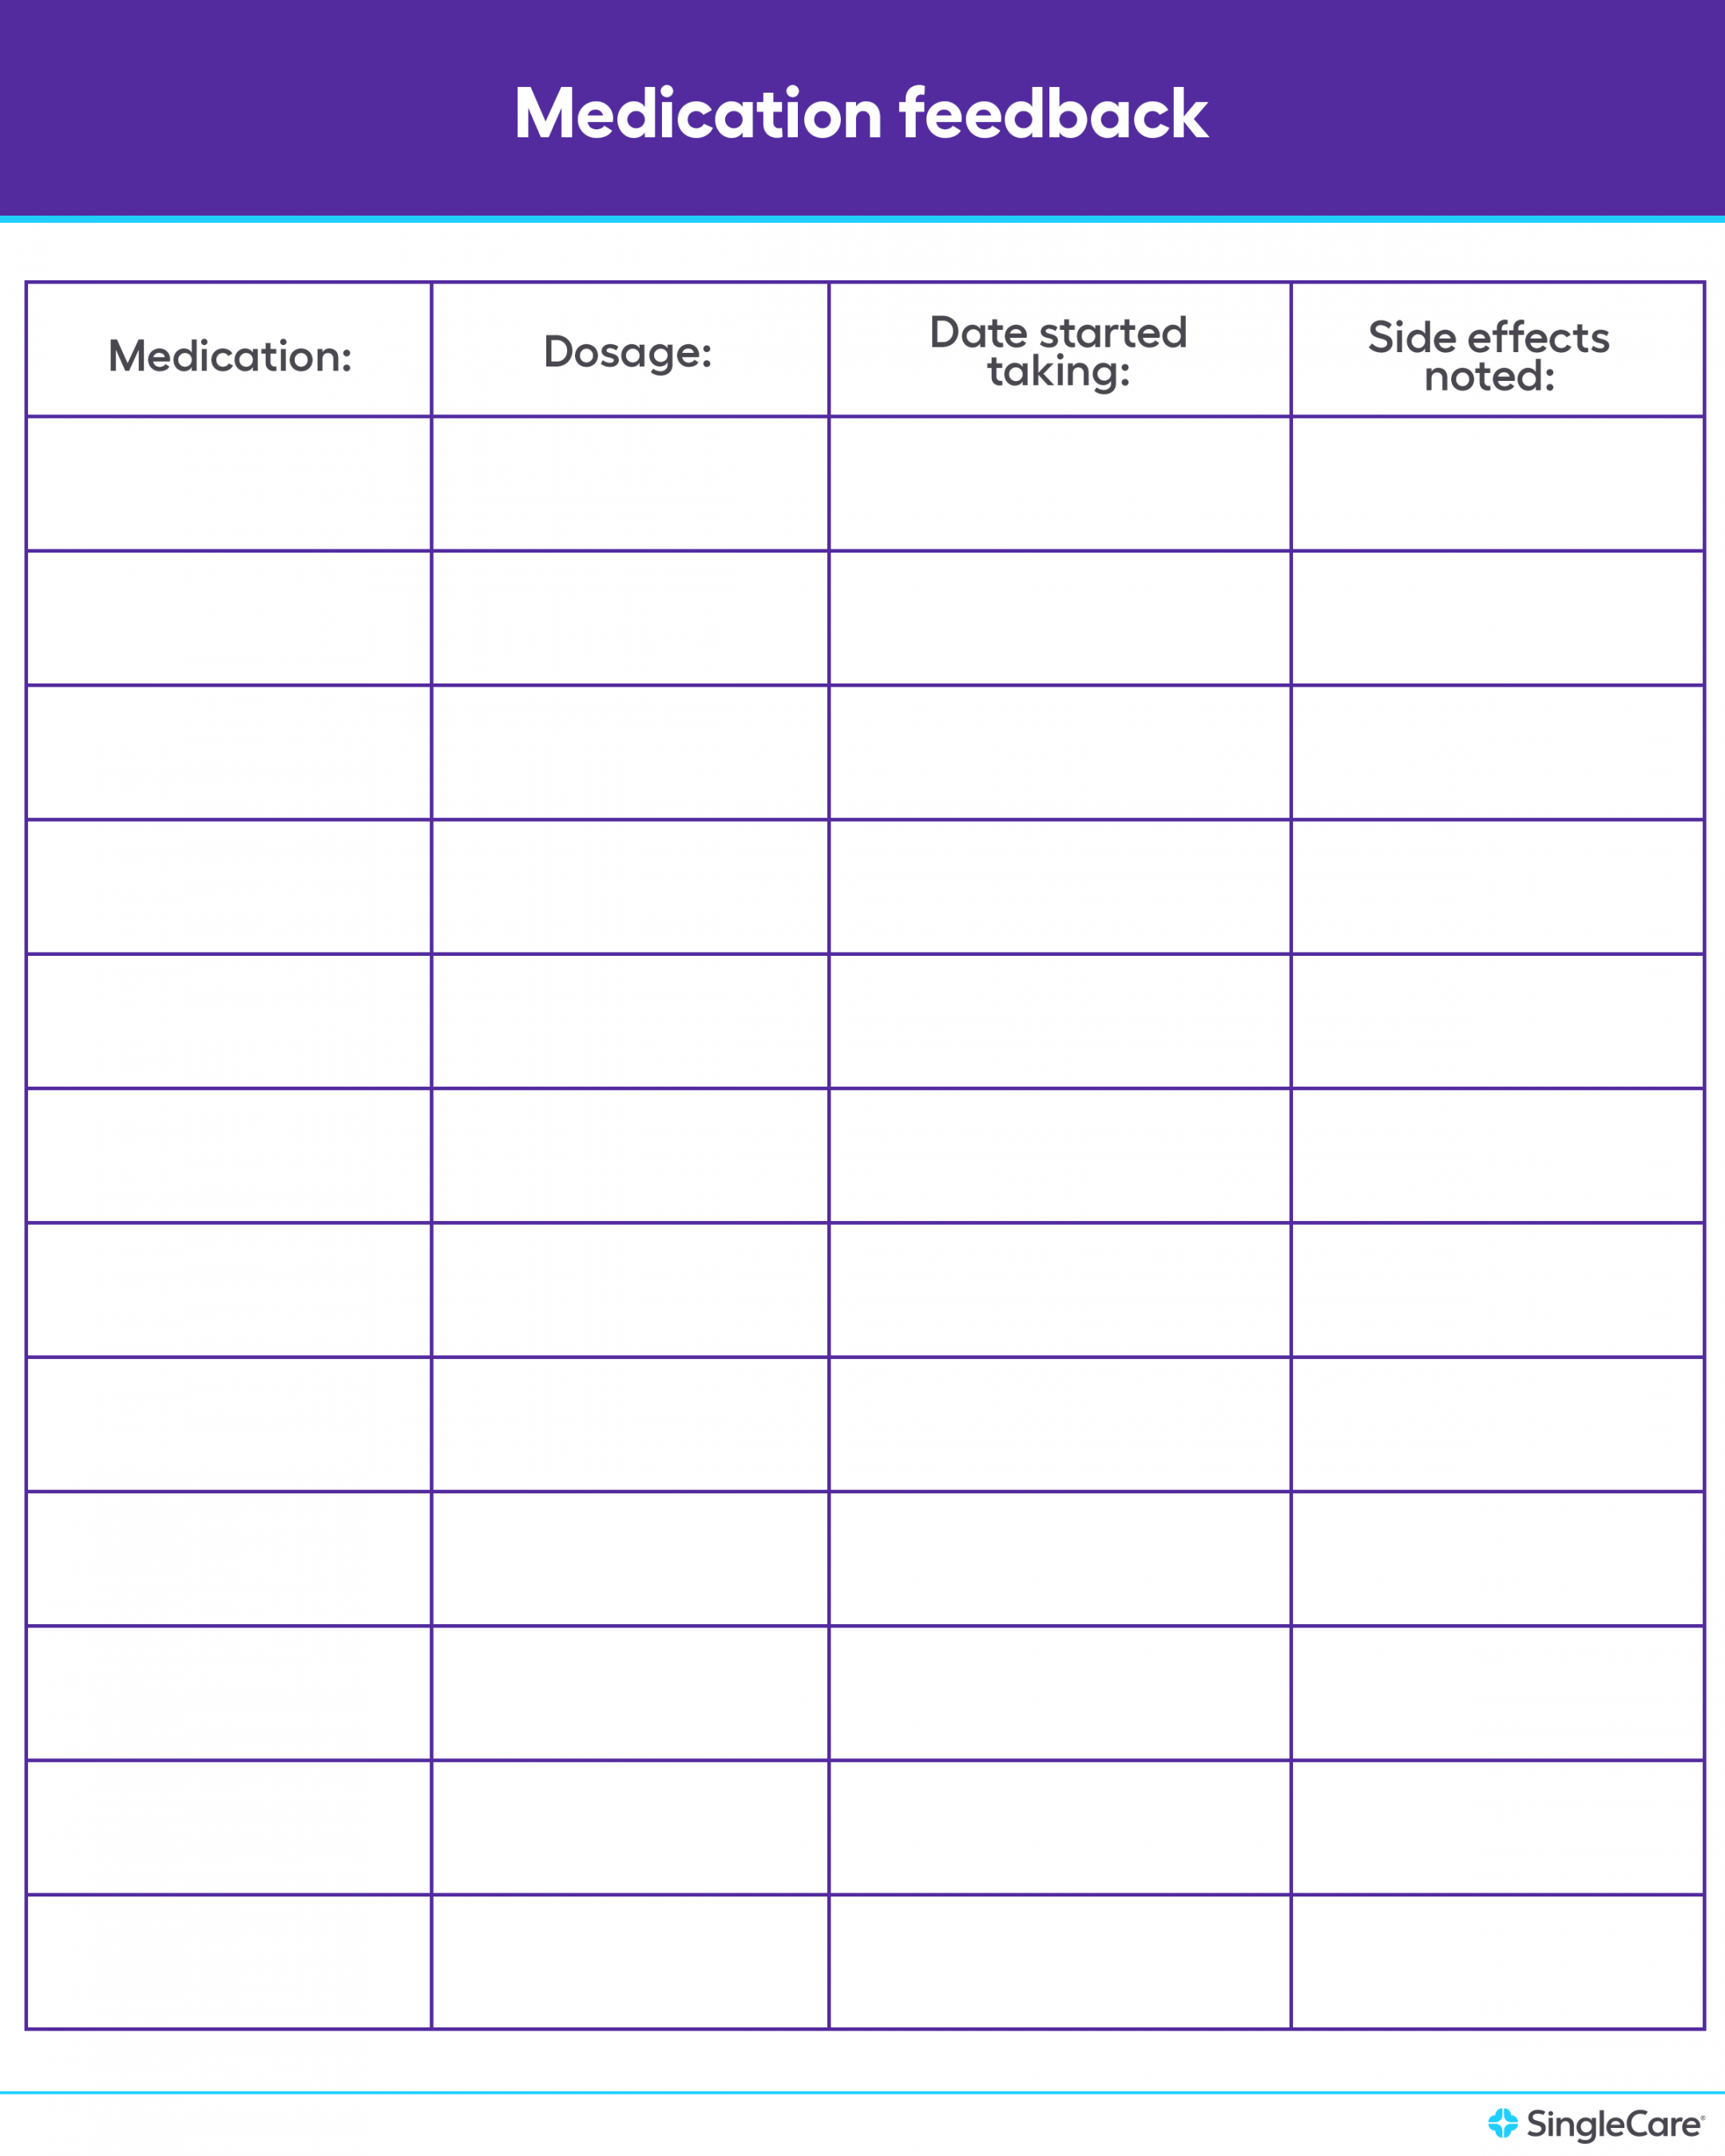 Free medication list templates for patients and caregivers - FREE Printables - Free Printable Medication List